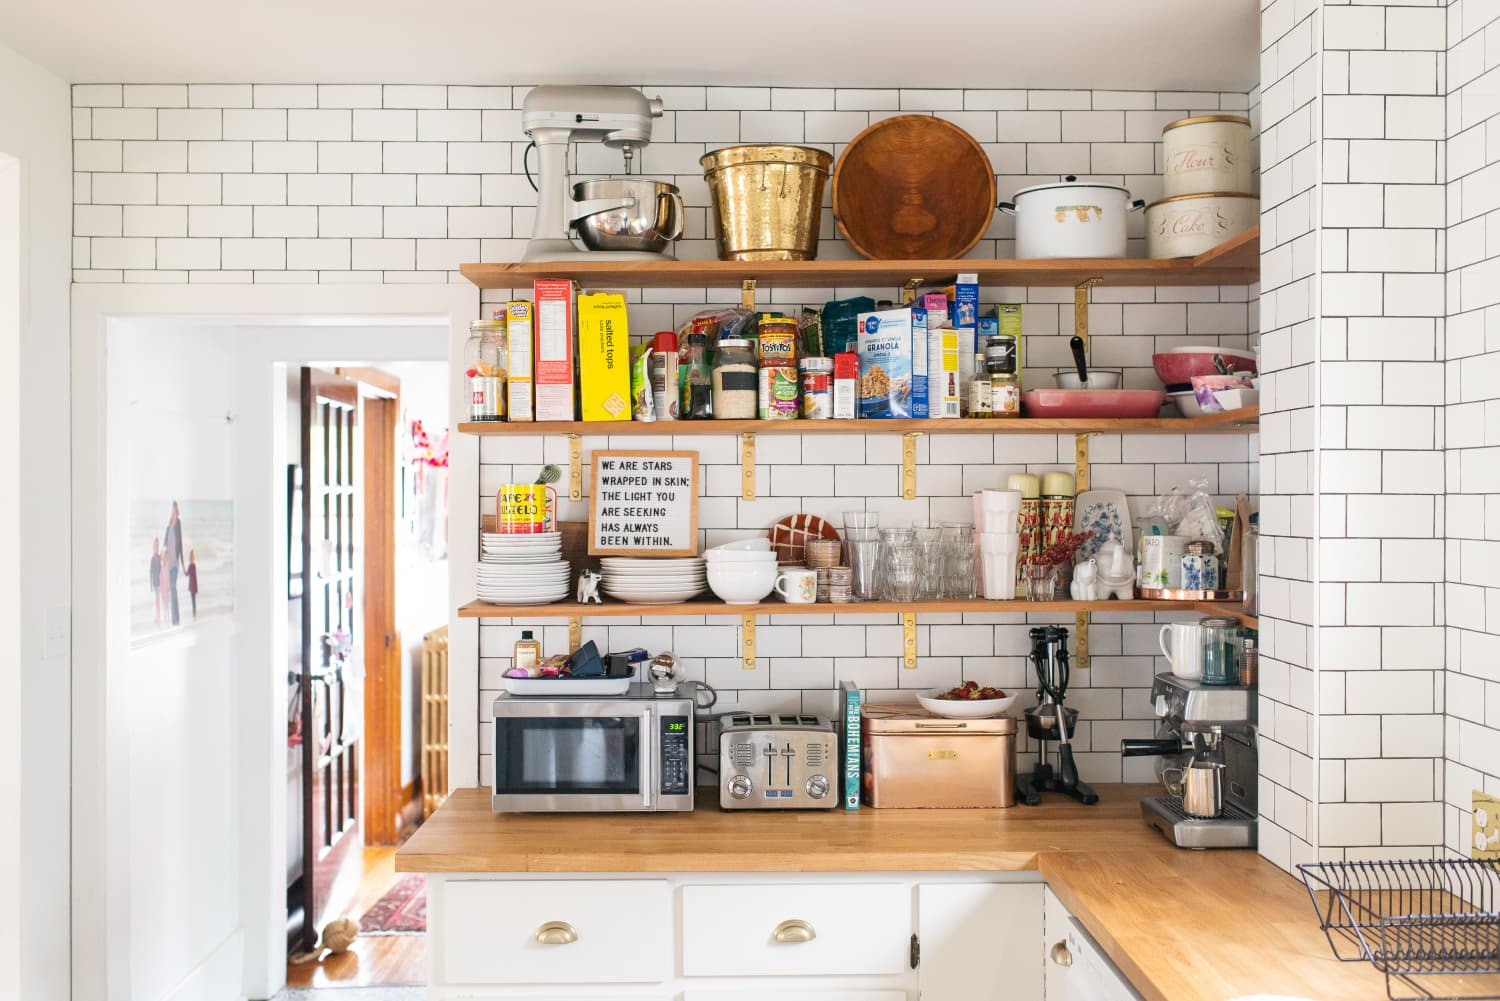 6 Little Ways You Can Spend More Sustainably at Home (and Save Money, Too)